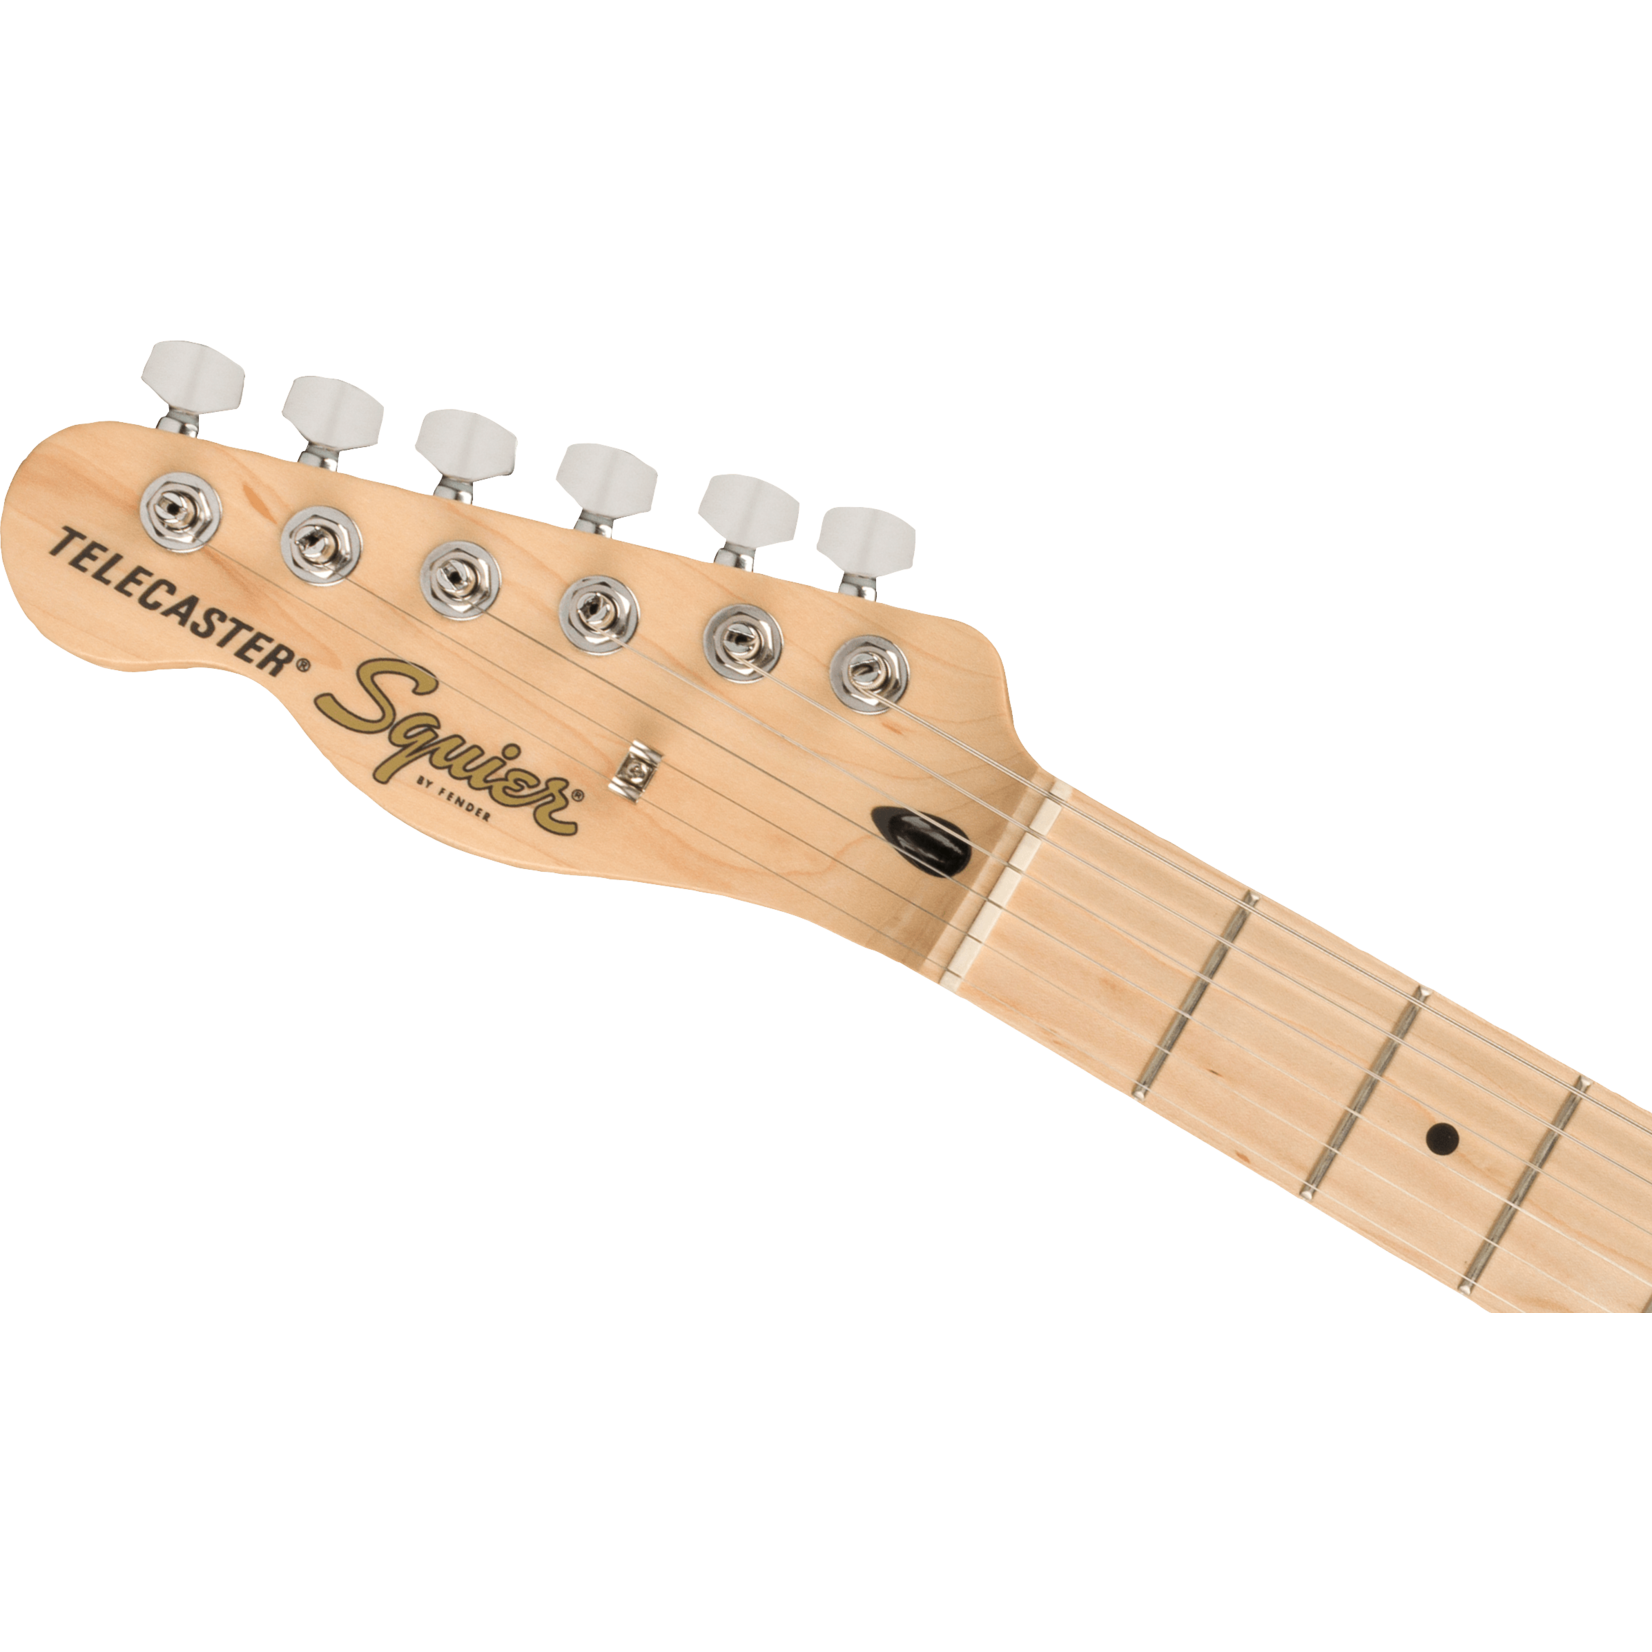 Squier Affinity Series Telecaster Left-Handed - Butterscotch Blonde